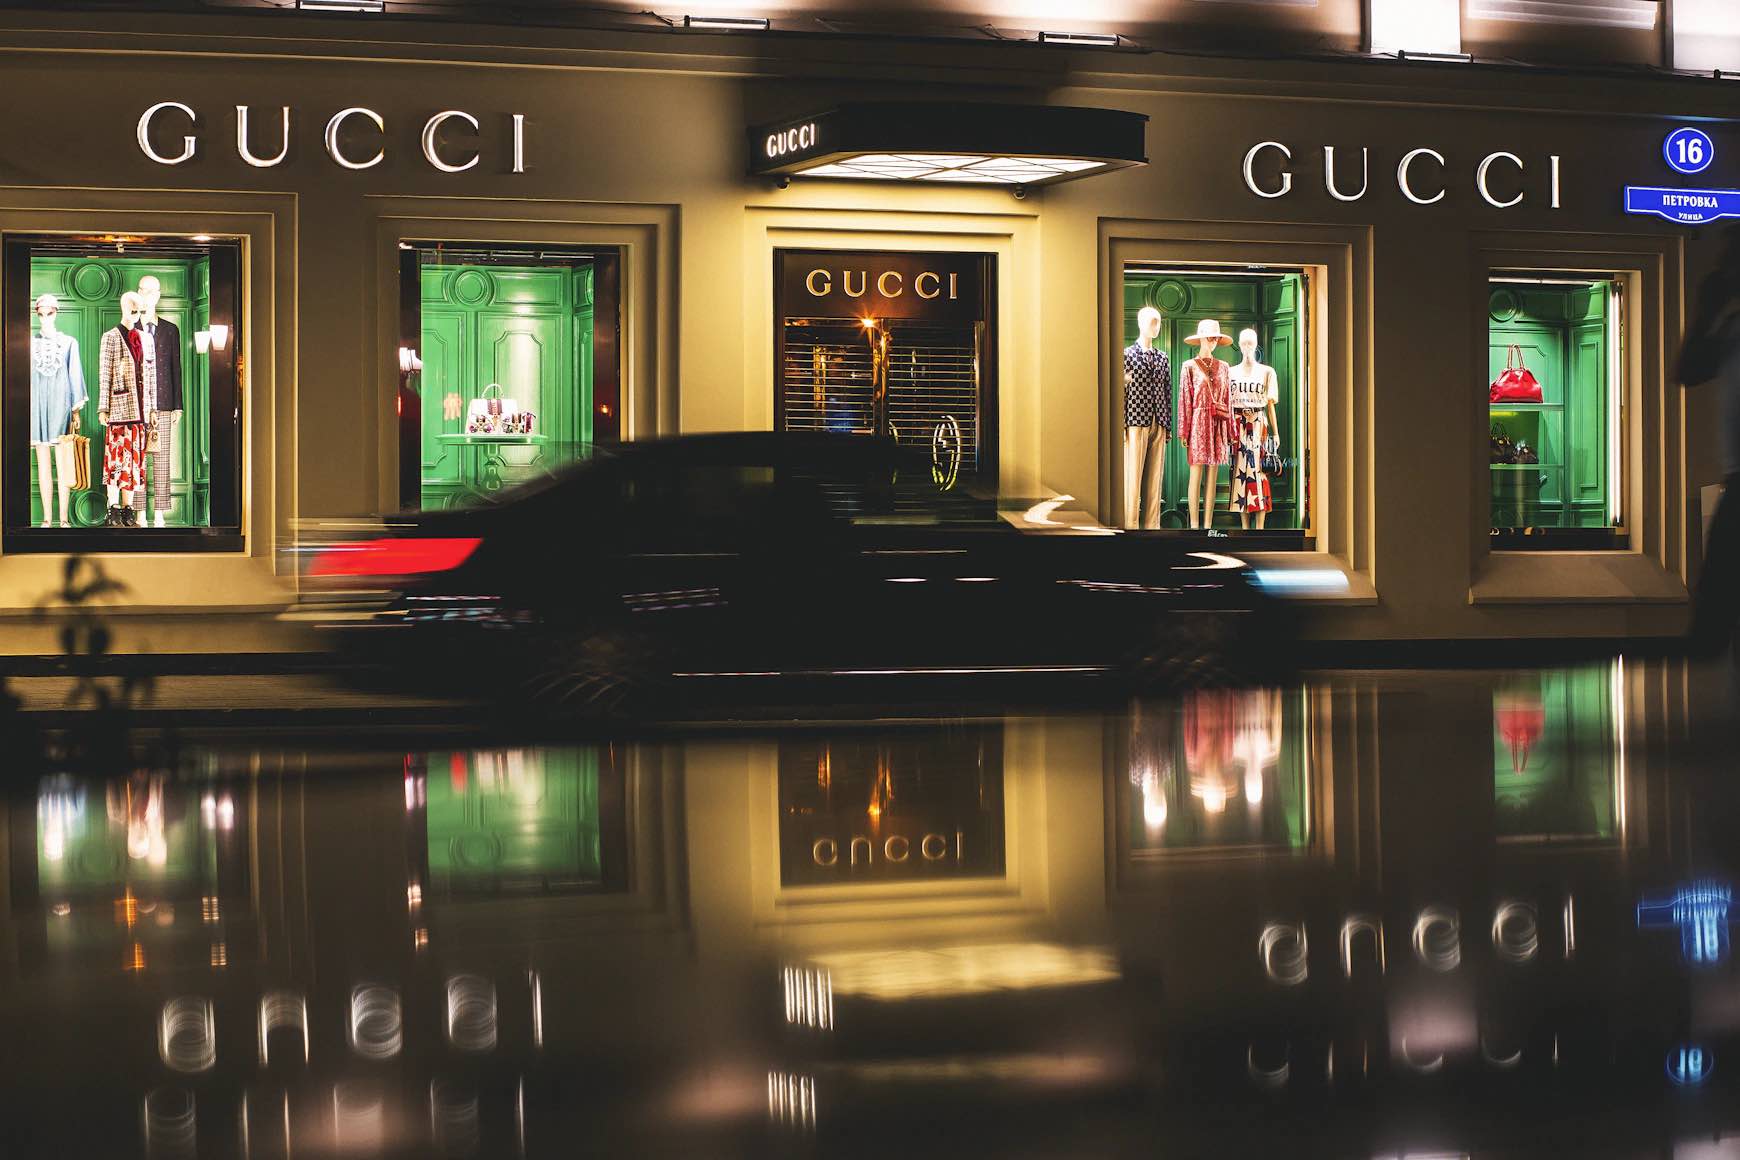 Former Gucci Executive Marco Bizzarri Launches Investment Firm